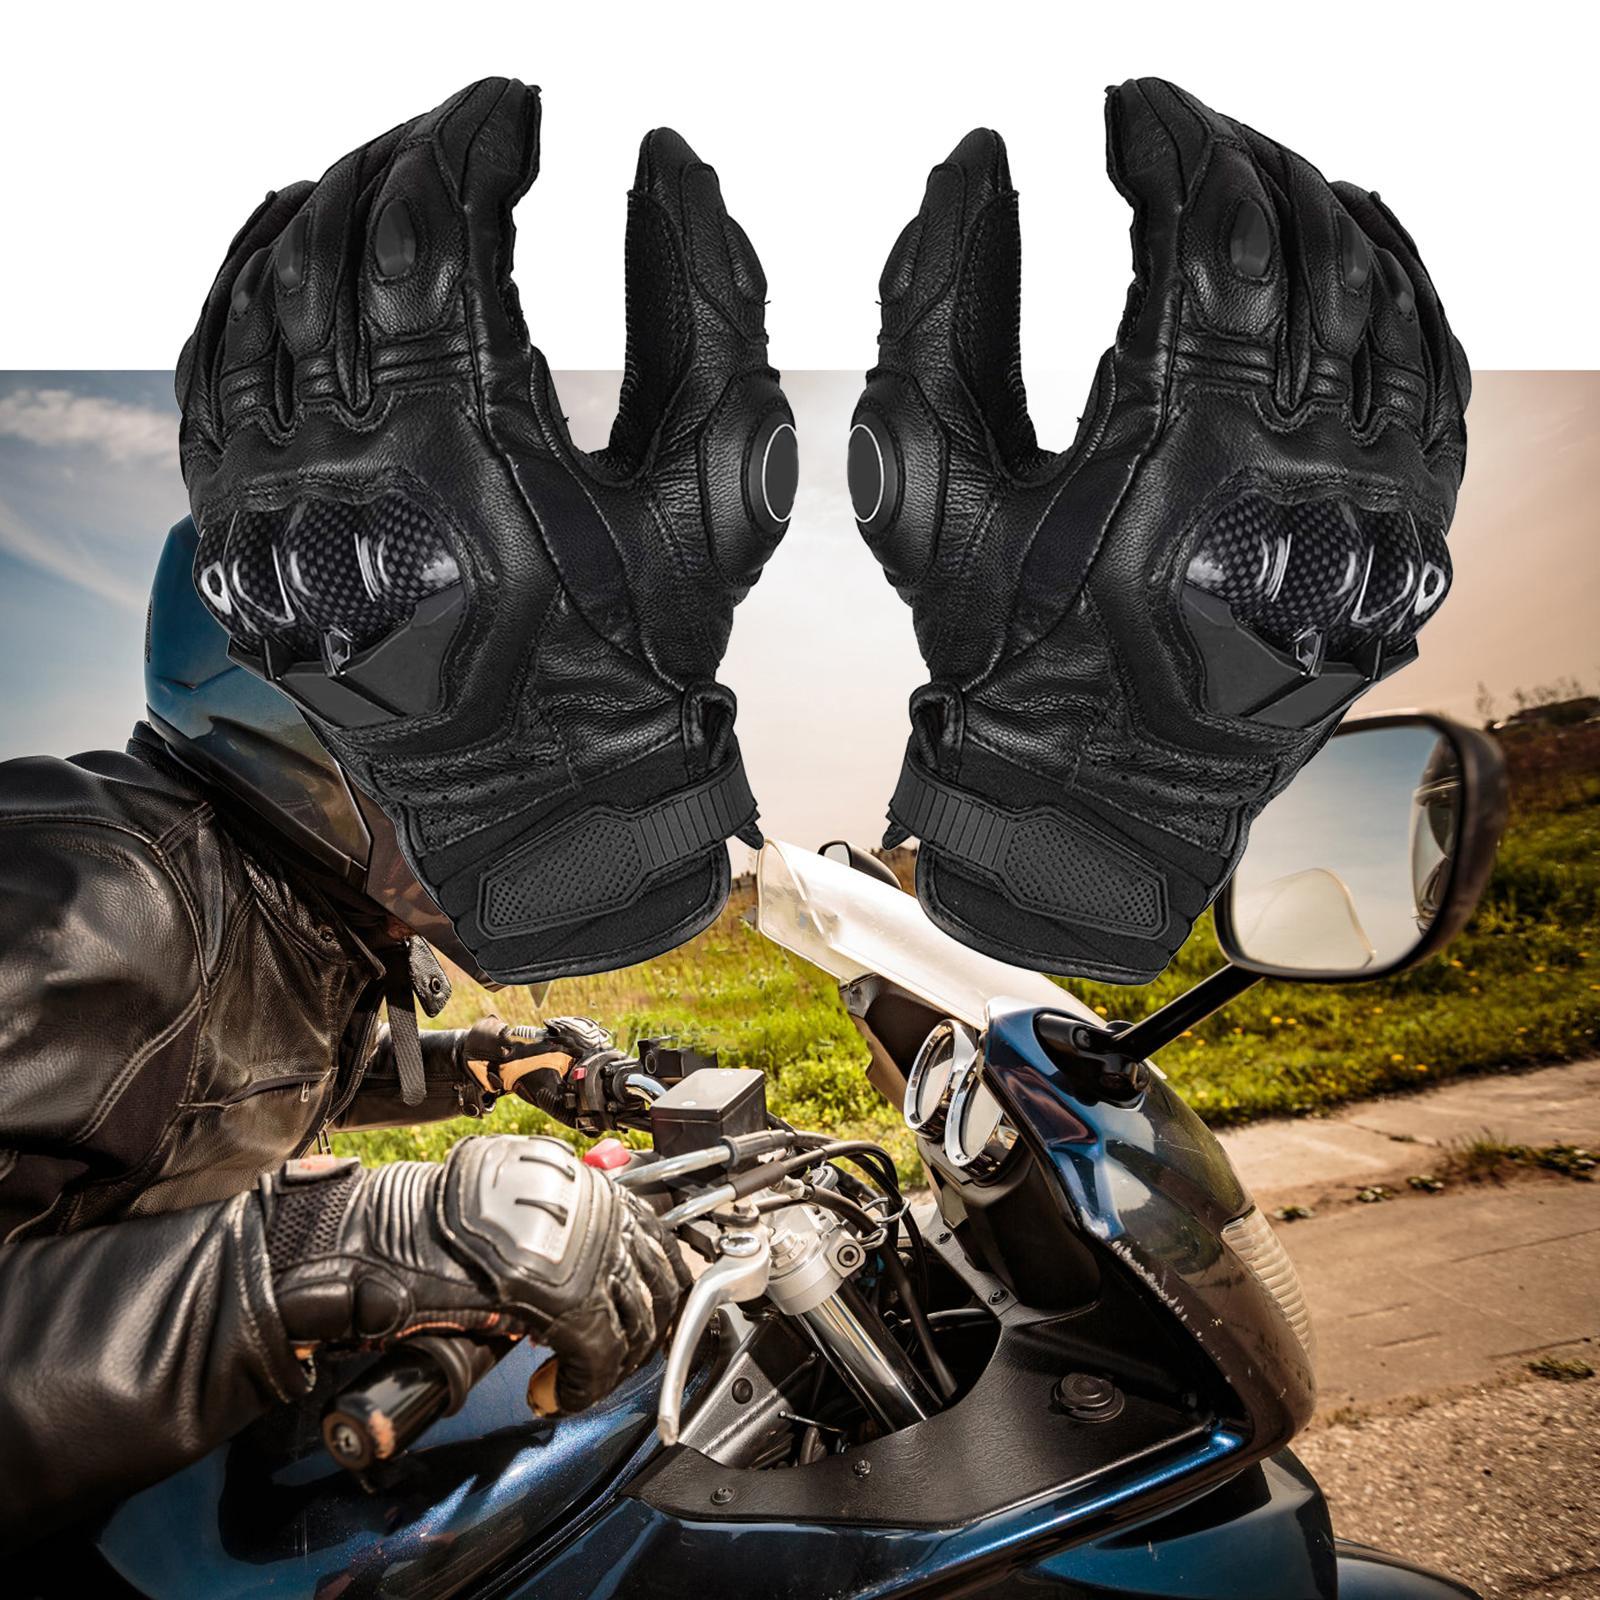 Premium PU Leather Motorcycle Gloves Touchscreen for Driving